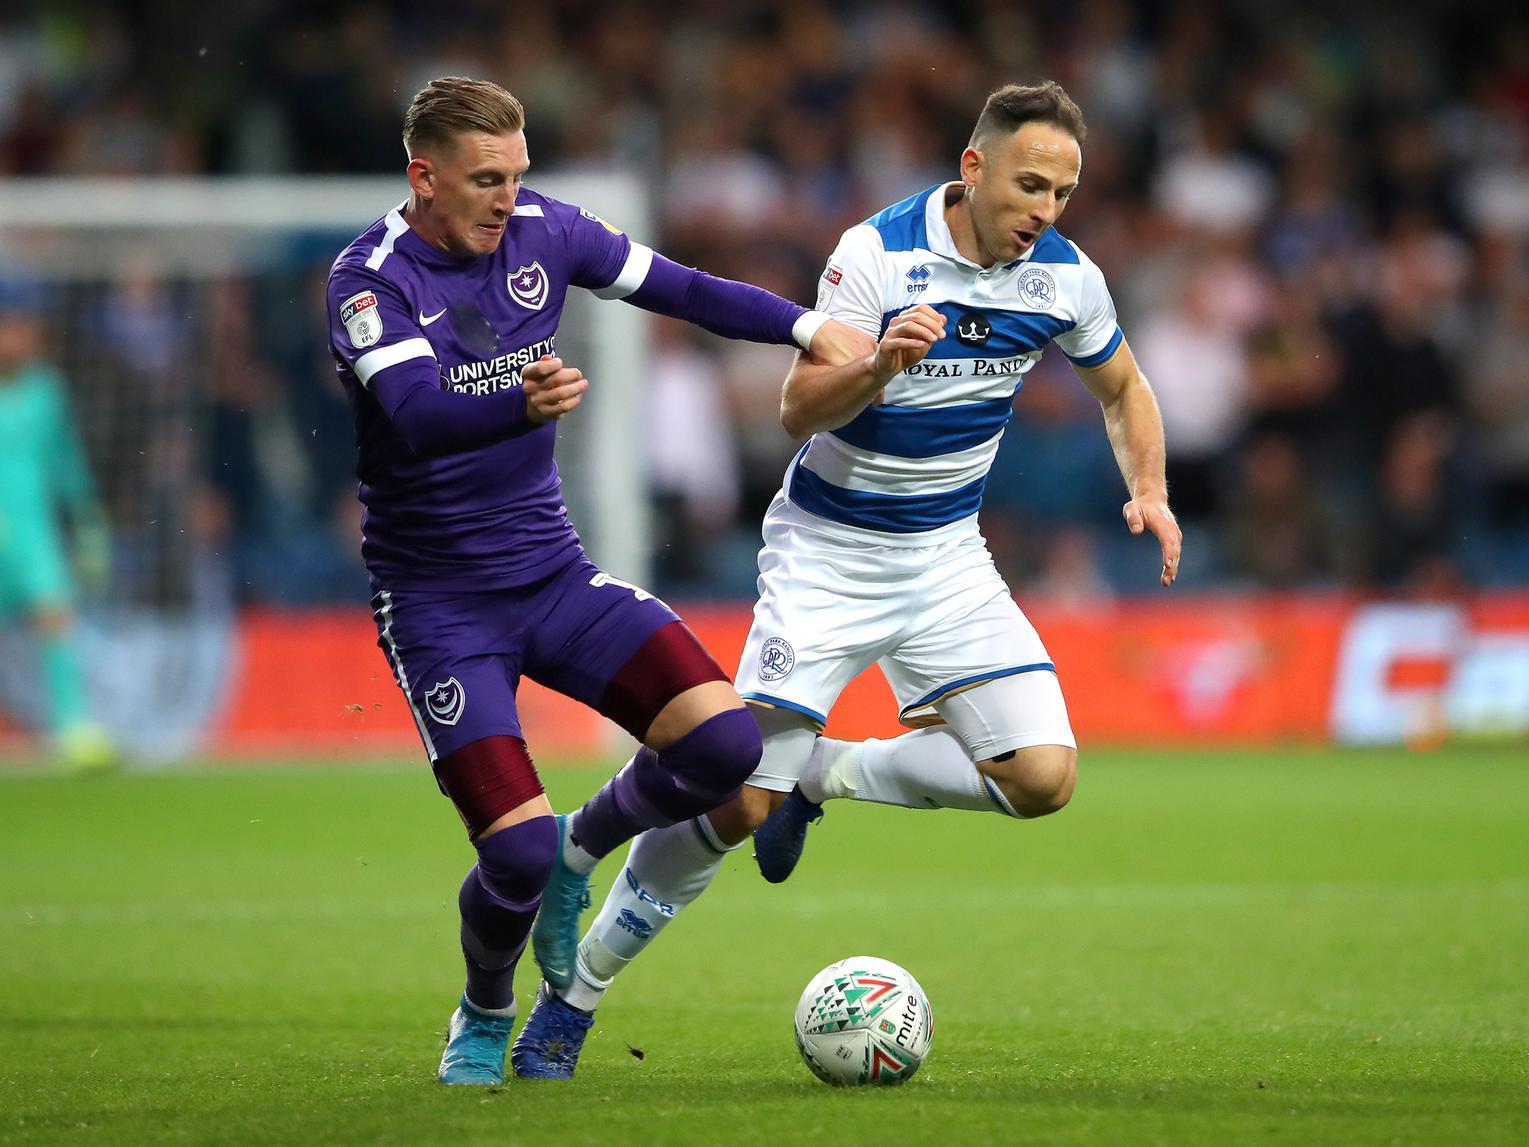 Ronan Curtis is apparently happy to stay with Portsmouth side until at least the summer and try and help them to promotion. (Lancashire Telegraph)